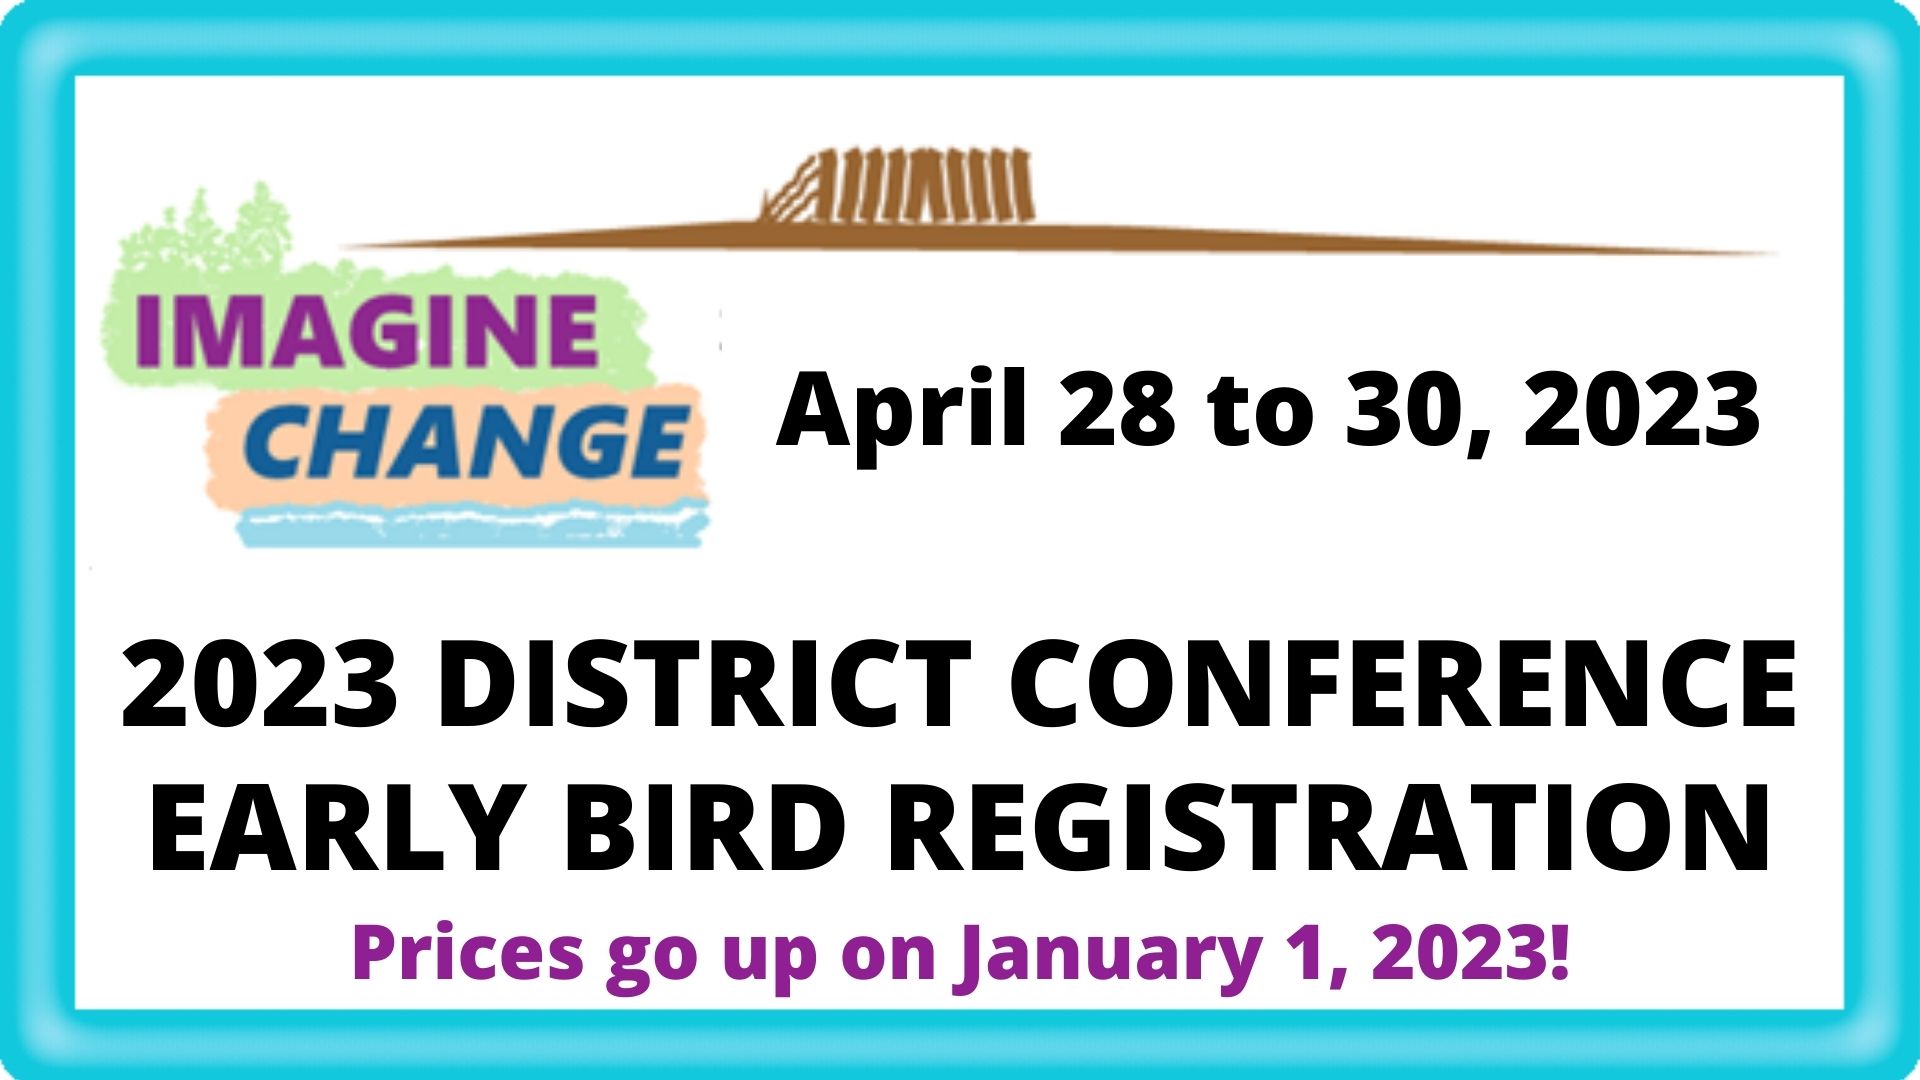 District Conference Early Bird Registration